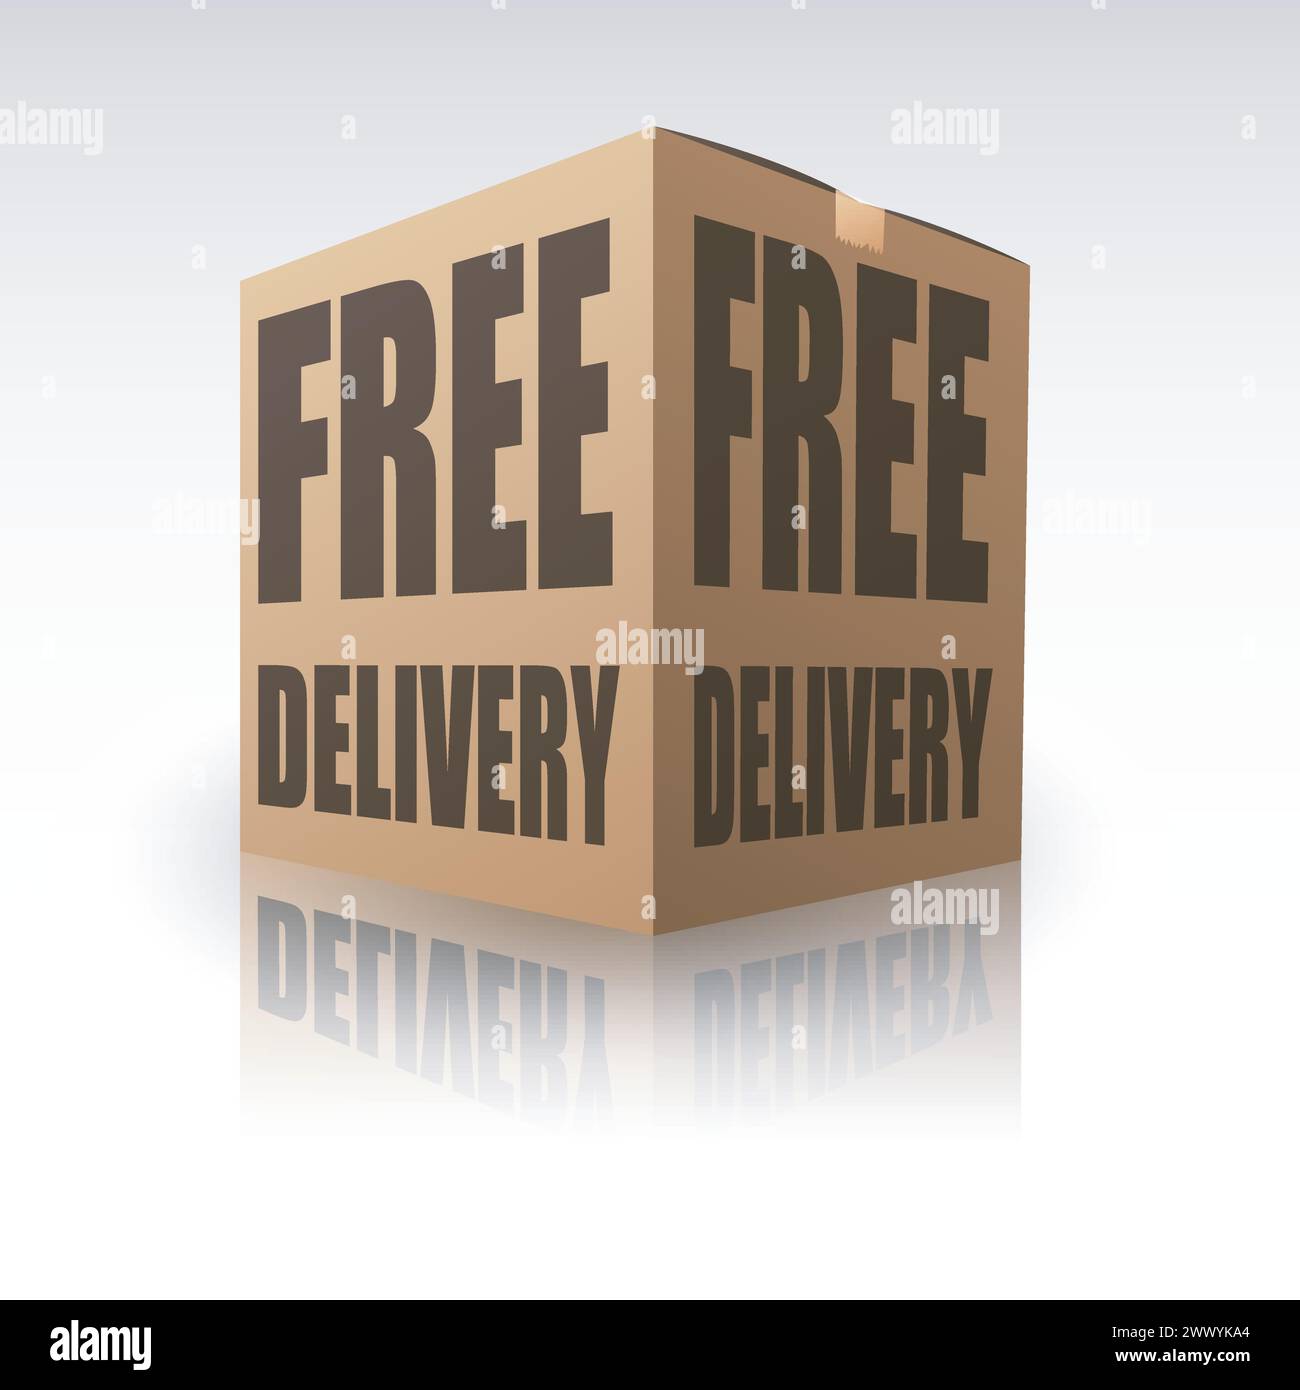 Free Delivery Package Shipping Online, Vector Illustration Stock Vector